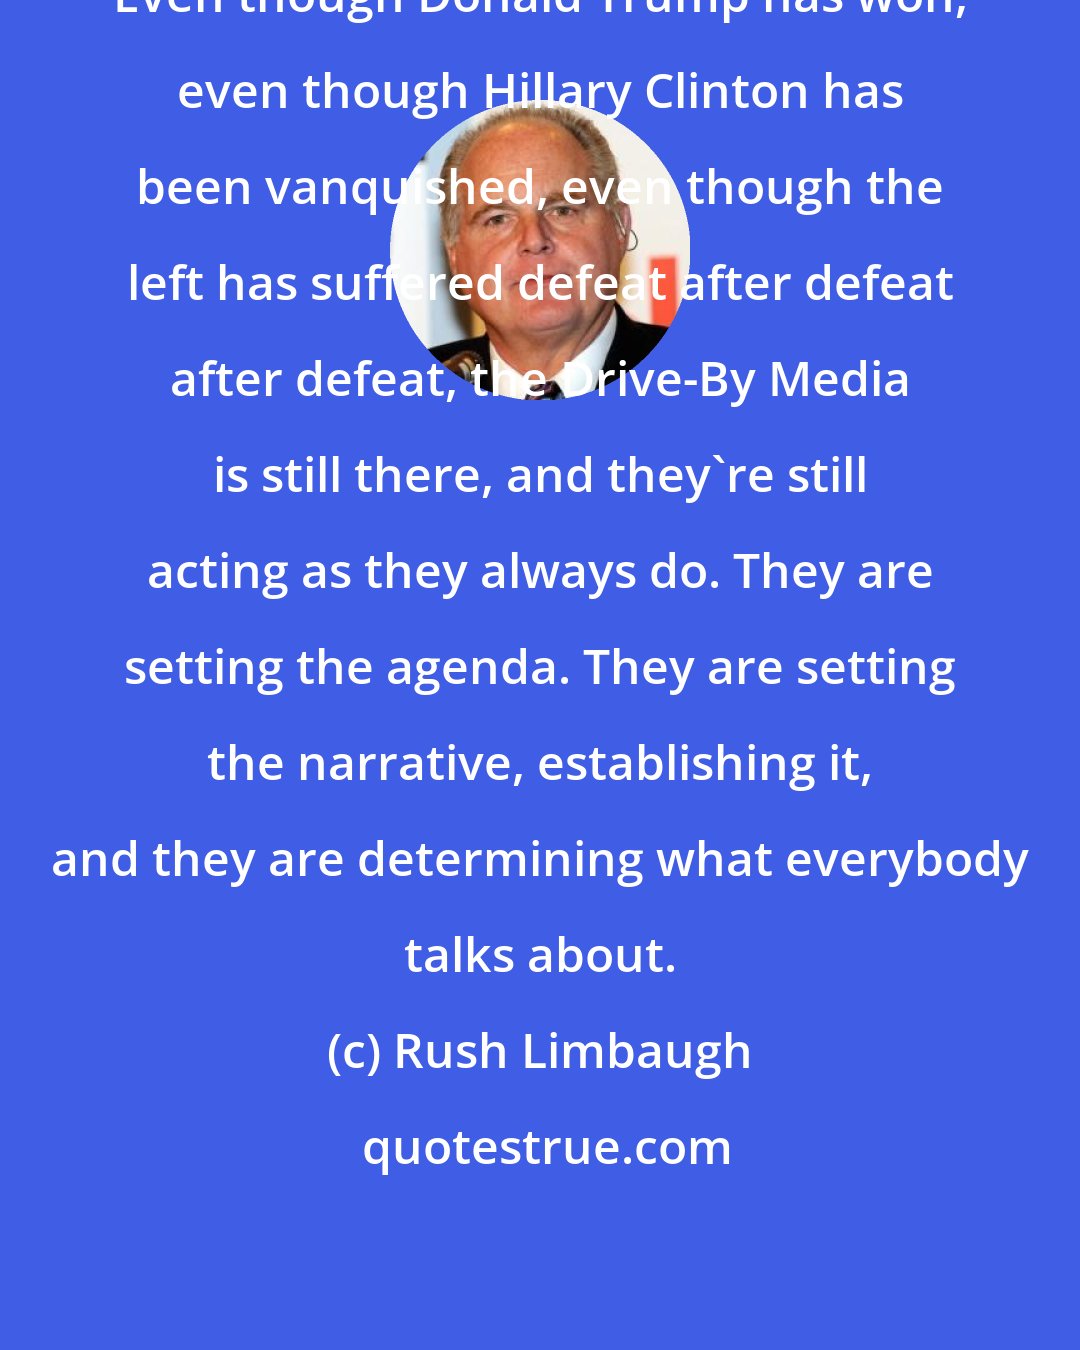 Rush Limbaugh: Even though Donald Trump has won, even though Hillary Clinton has been vanquished, even though the left has suffered defeat after defeat after defeat, the Drive-By Media is still there, and they're still acting as they always do. They are setting the agenda. They are setting the narrative, establishing it, and they are determining what everybody talks about.